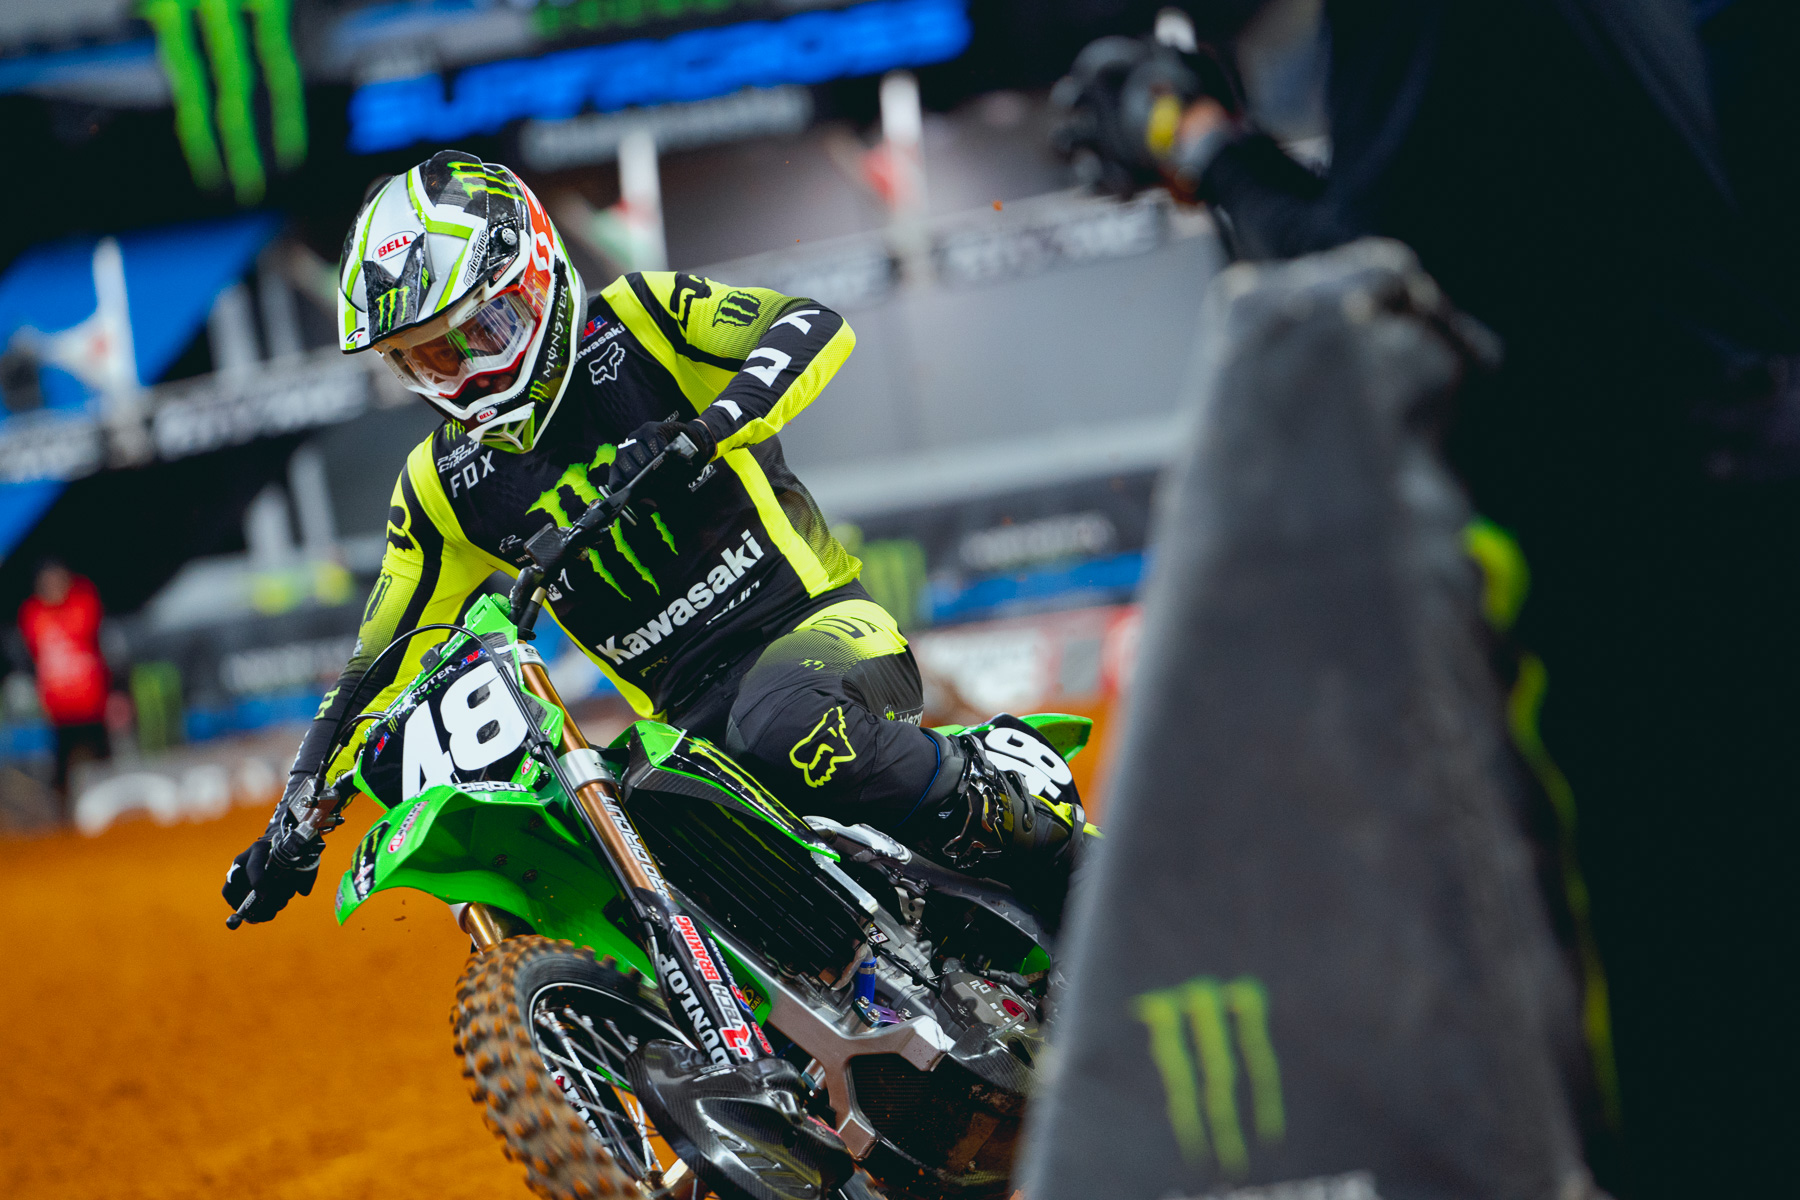 2022 Arlington Supercross Entry List, Injury Report and Track Map